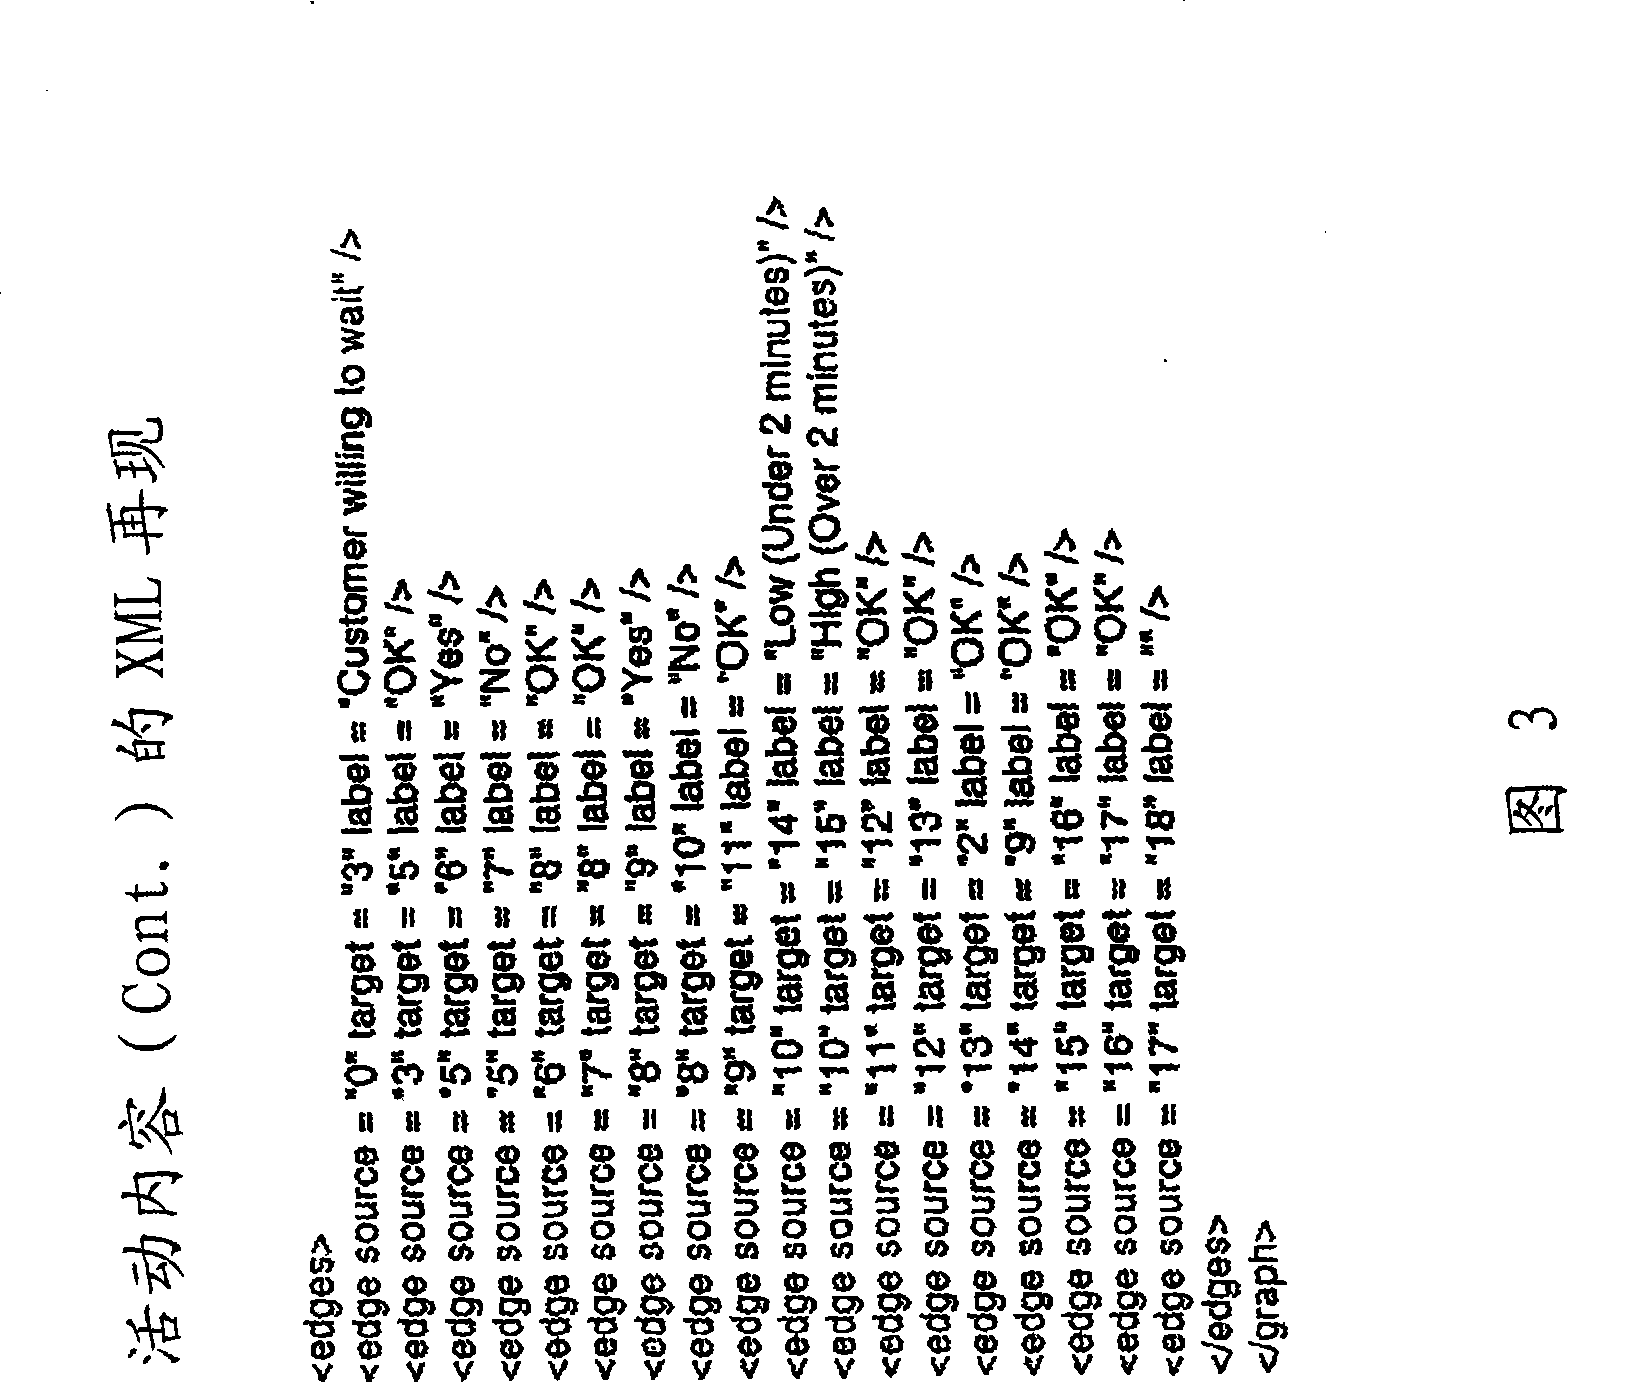 System and method for creating, executing and searching through a form of active web-based content